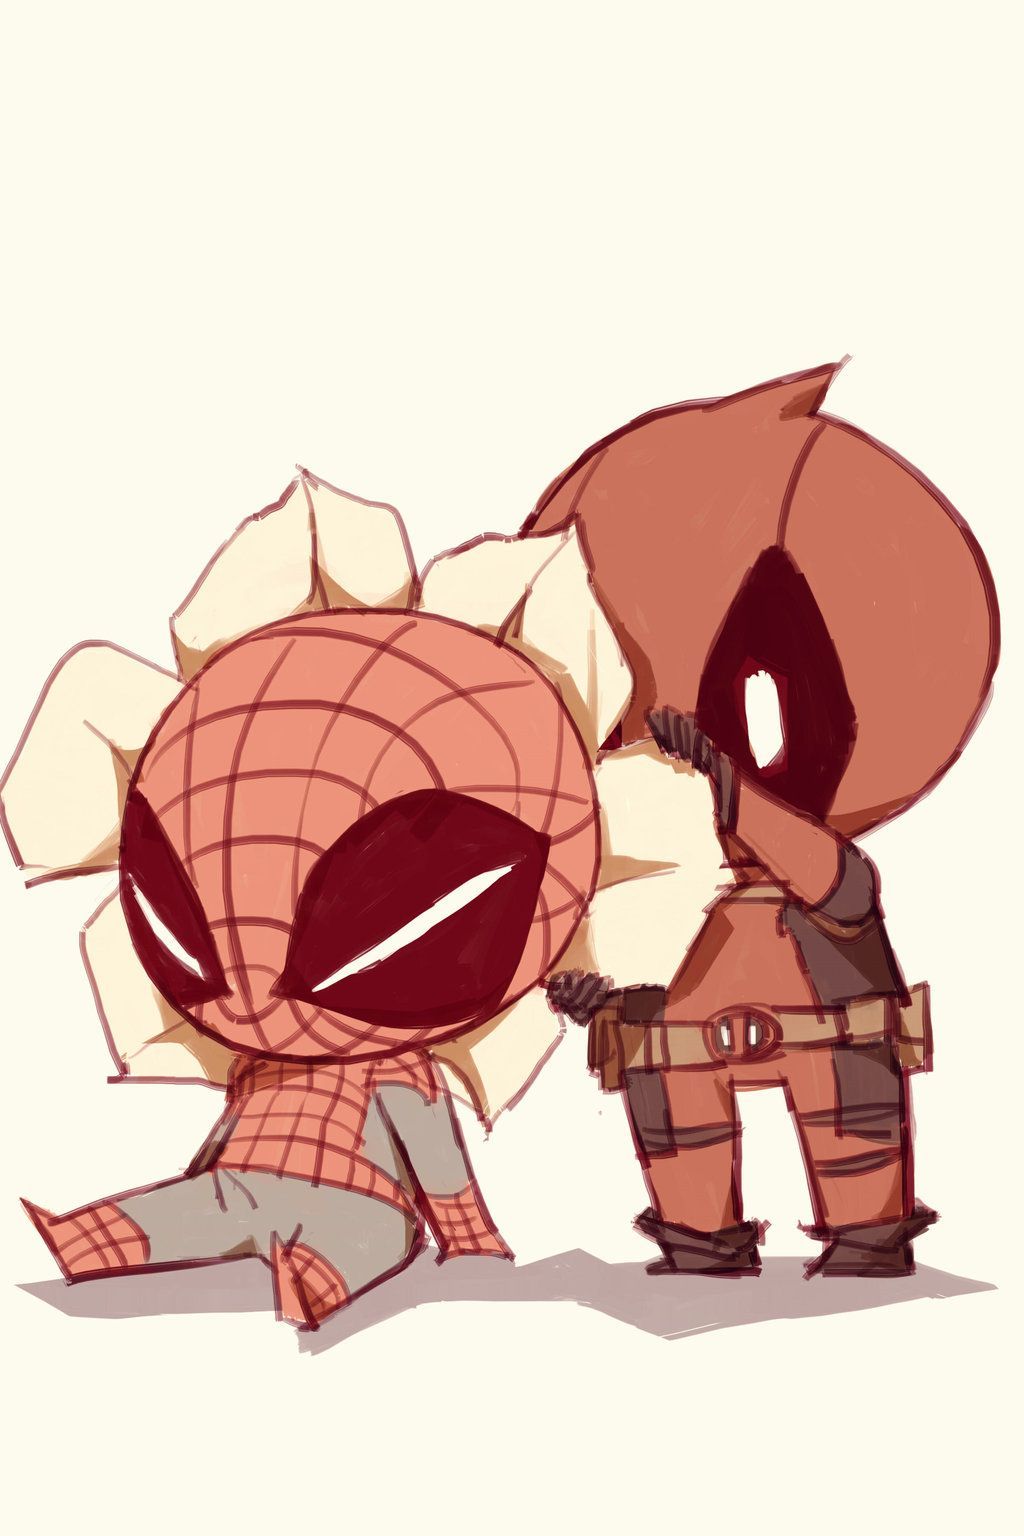 Chibi Deadpool And Spider Man Wallpaper Free Chibi Deadpool And Spider Man Background